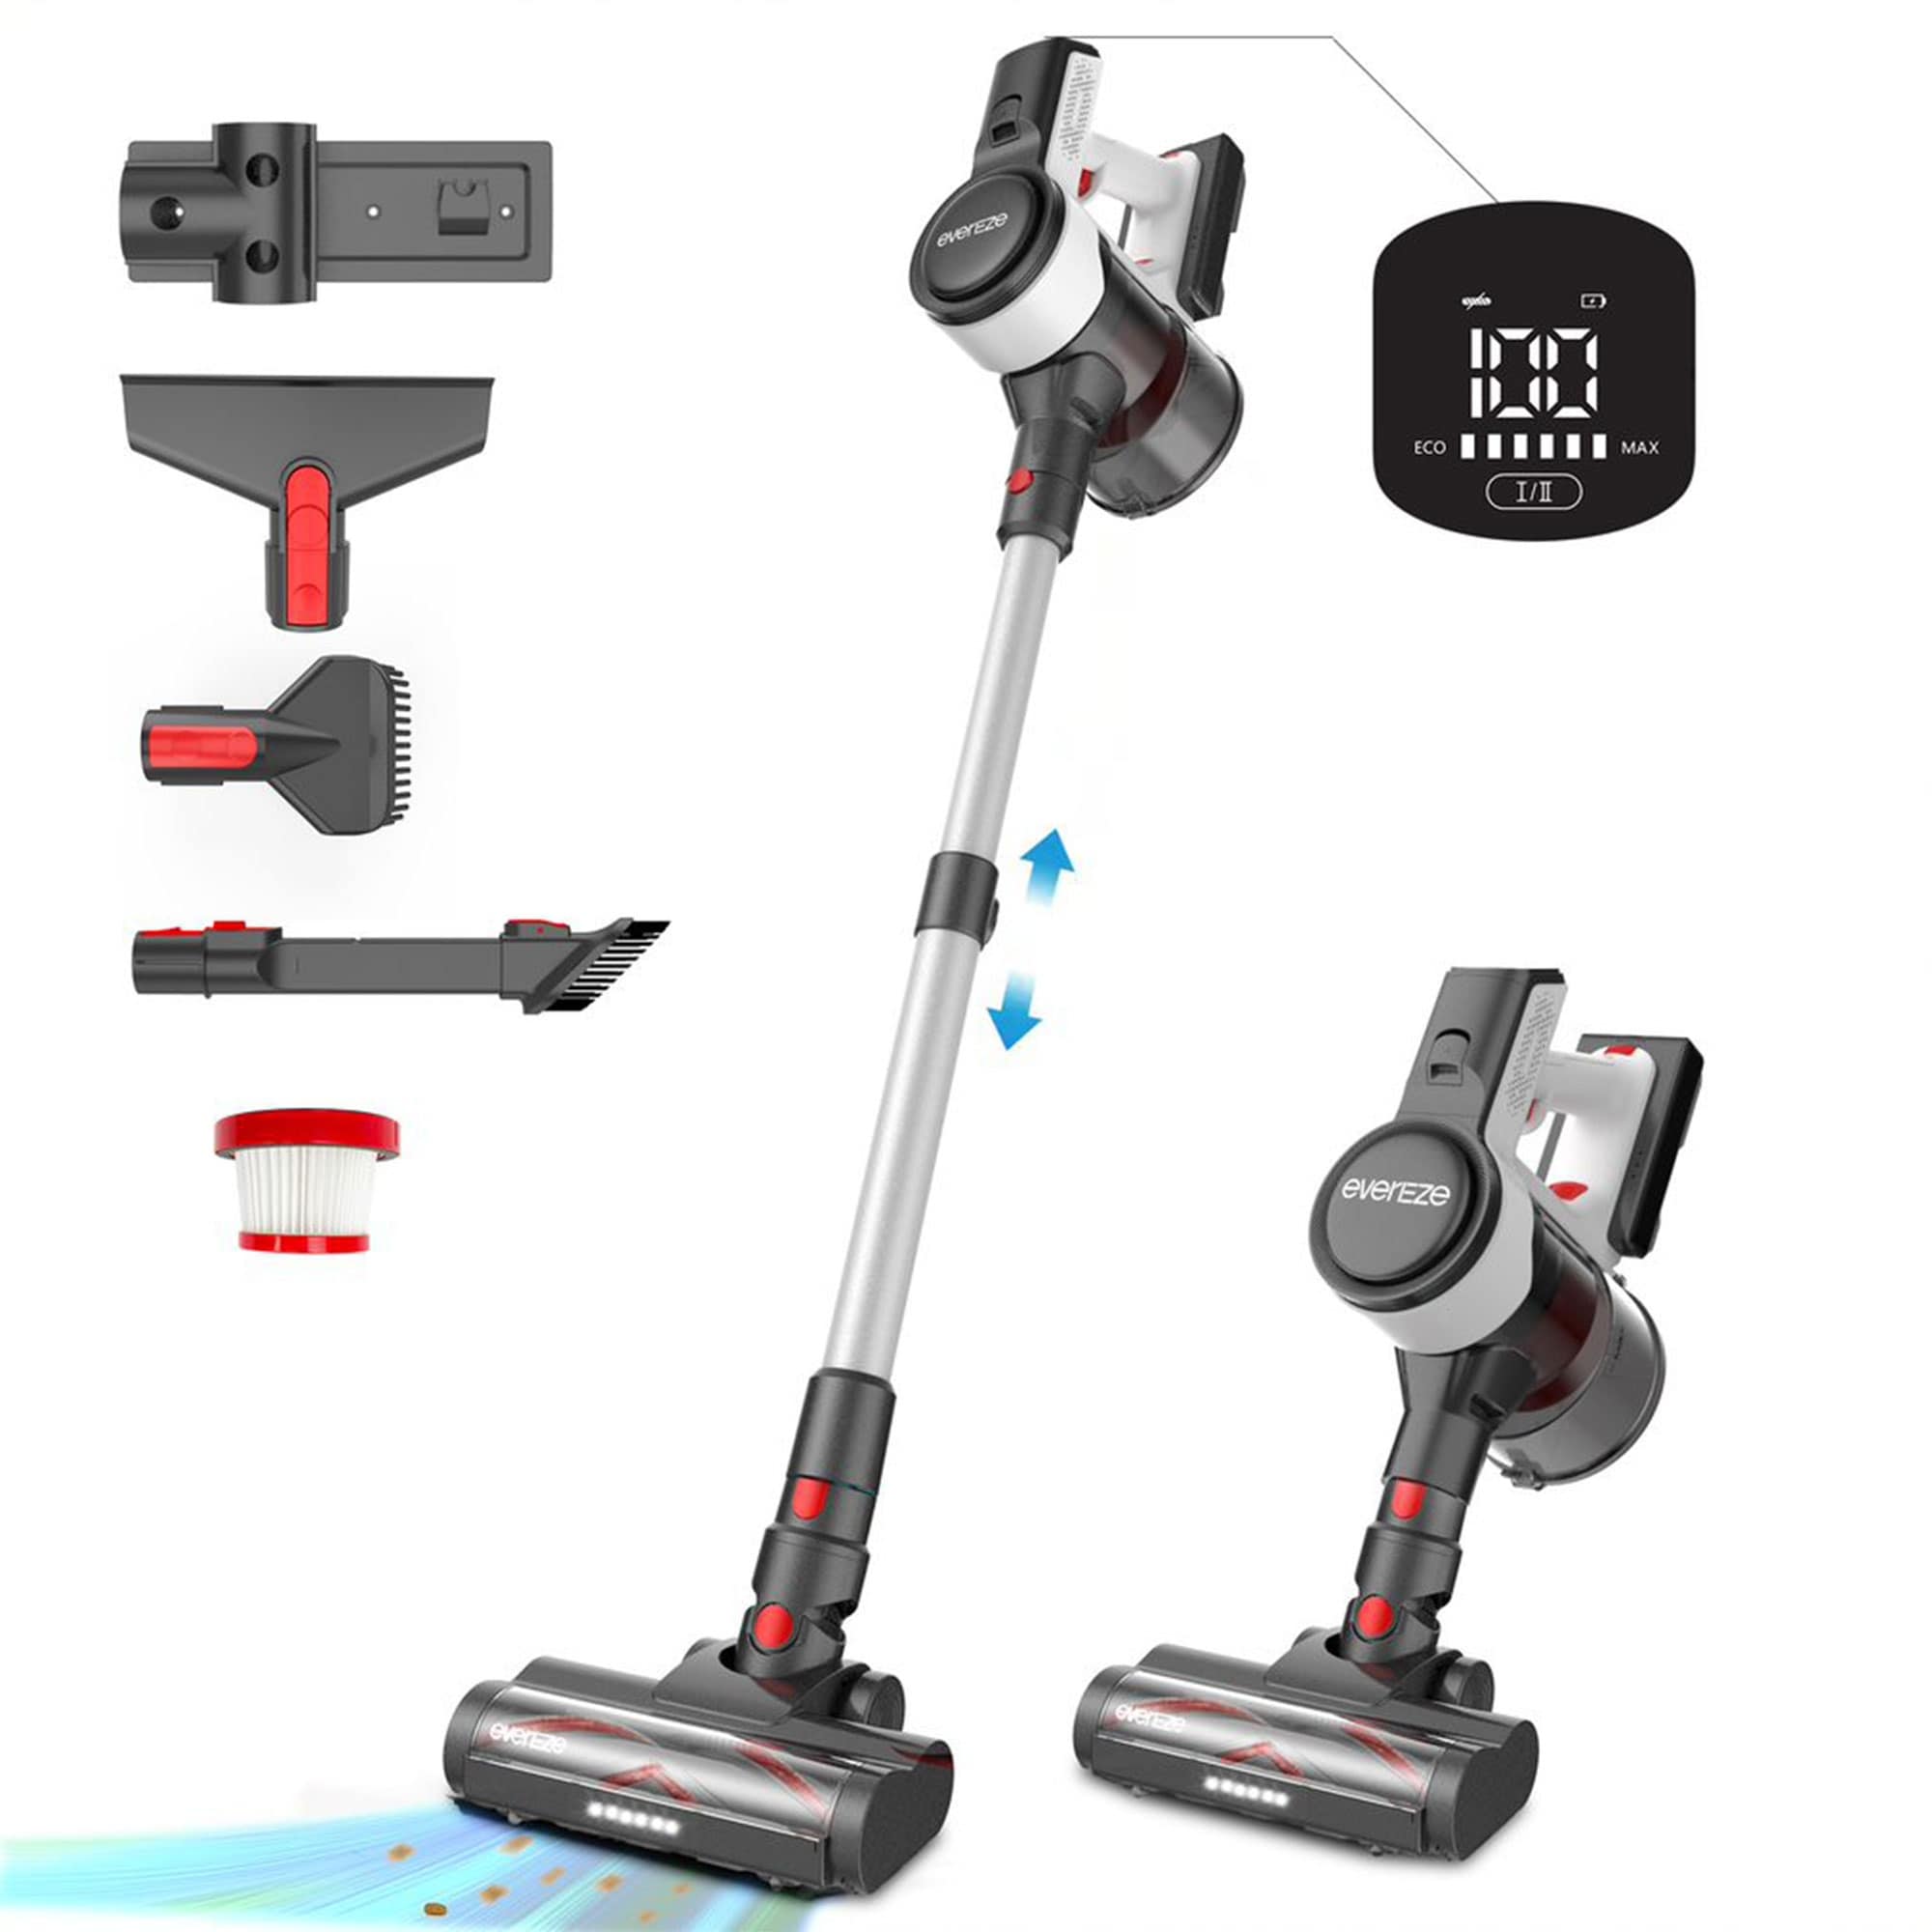 https://ak1.ostkcdn.com/images/products/is/images/direct/f0facc943fdd32953b01965c4323e90bbbeb2f7d/Evereze-Cordless-Vacuum-Cleaner-with-45-Minute-Runtime-and-1.1-Qt-Large-Dust-Cup.jpg